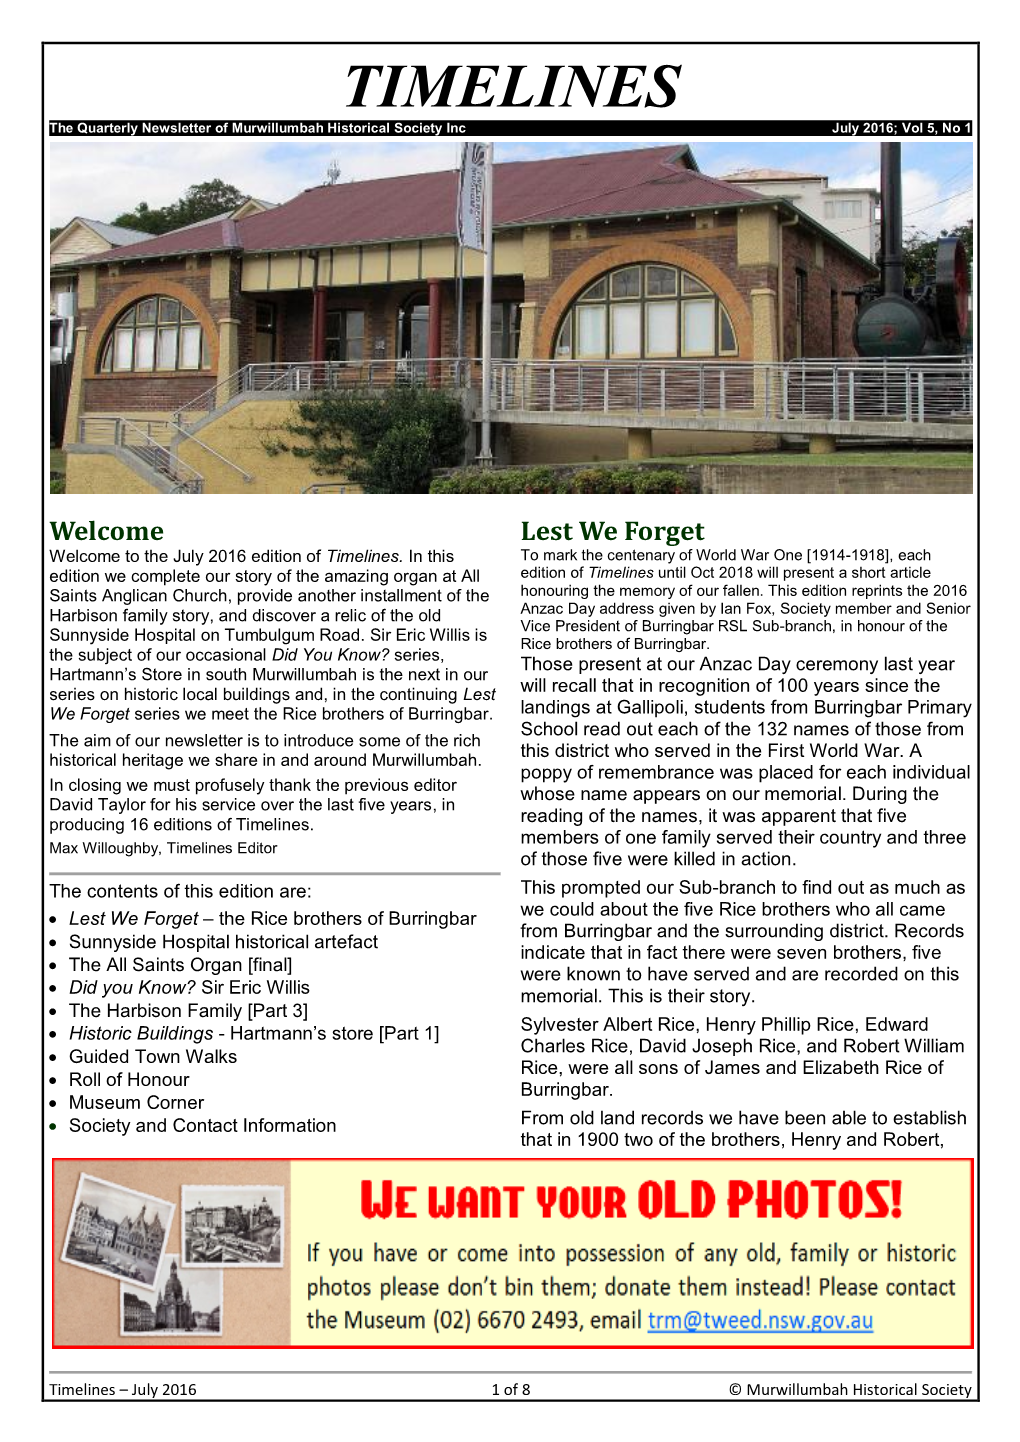 TIMELINES the Quarterly Newsletter of Murwillumbah Historical Society Inc July 2016; Vol 5, No 1